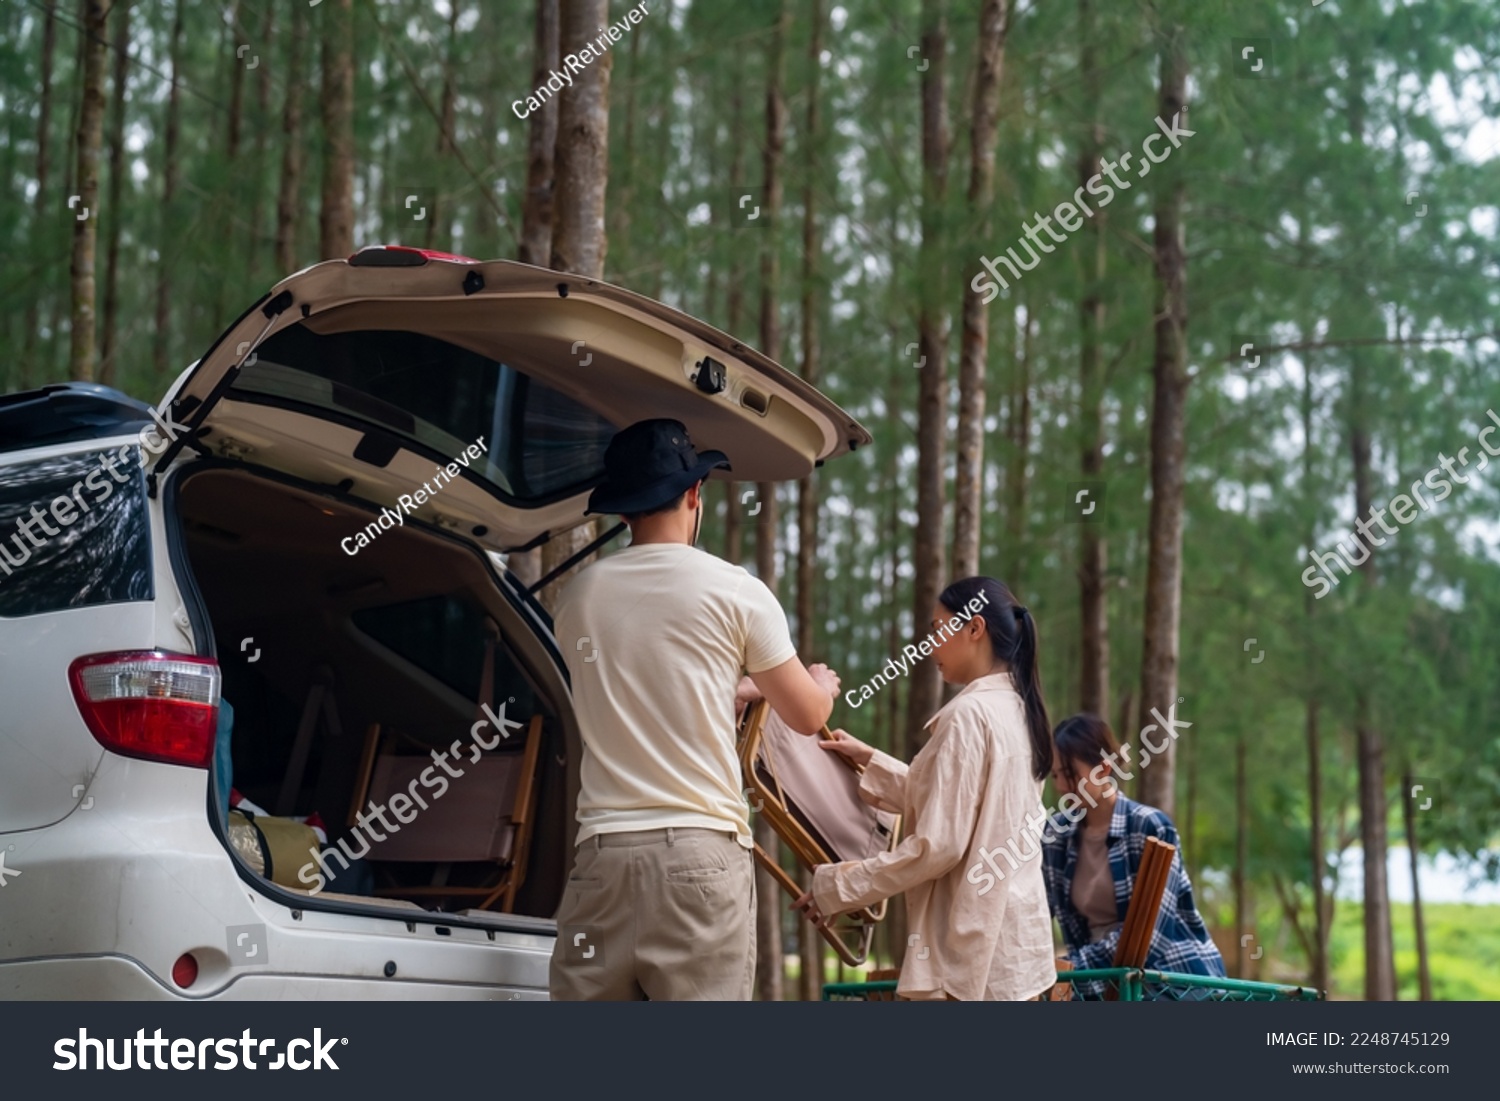 Group of Asian people friends enjoy outdoor lifestyle road trip and camping together on summer holiday travel vacation. Man and woman taking off camping supplies from car trunk at natural park. #2248745129